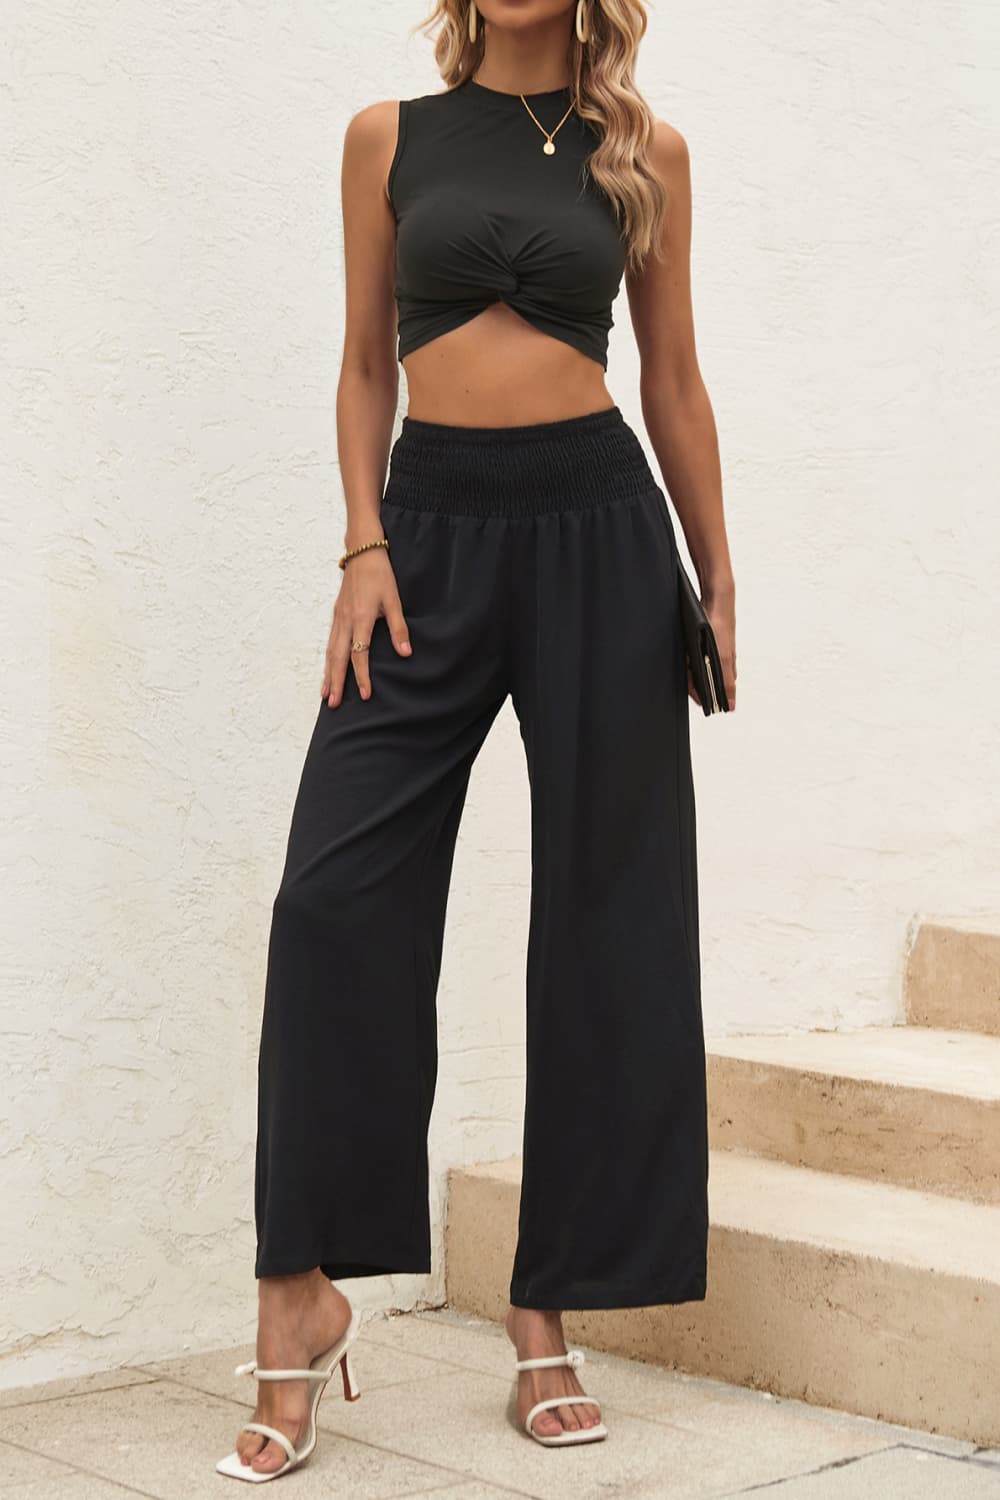 Twist Front Cropped Tank and Pants Set - nailedmoms